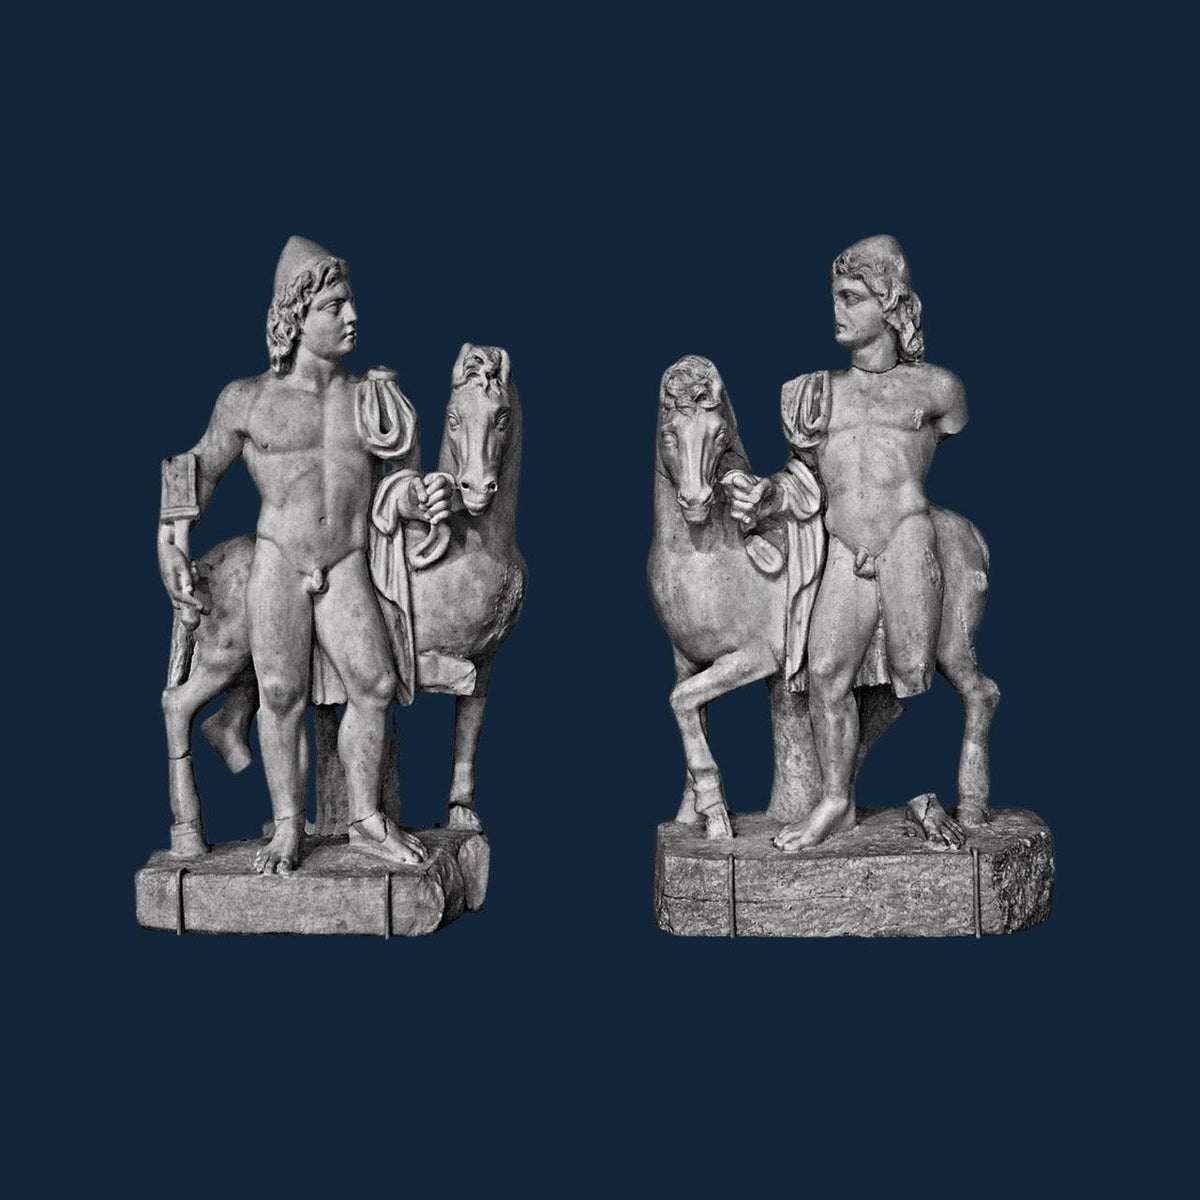 Explore the History of Dioskouroi, the Gods of Horsemen and Gymnasia